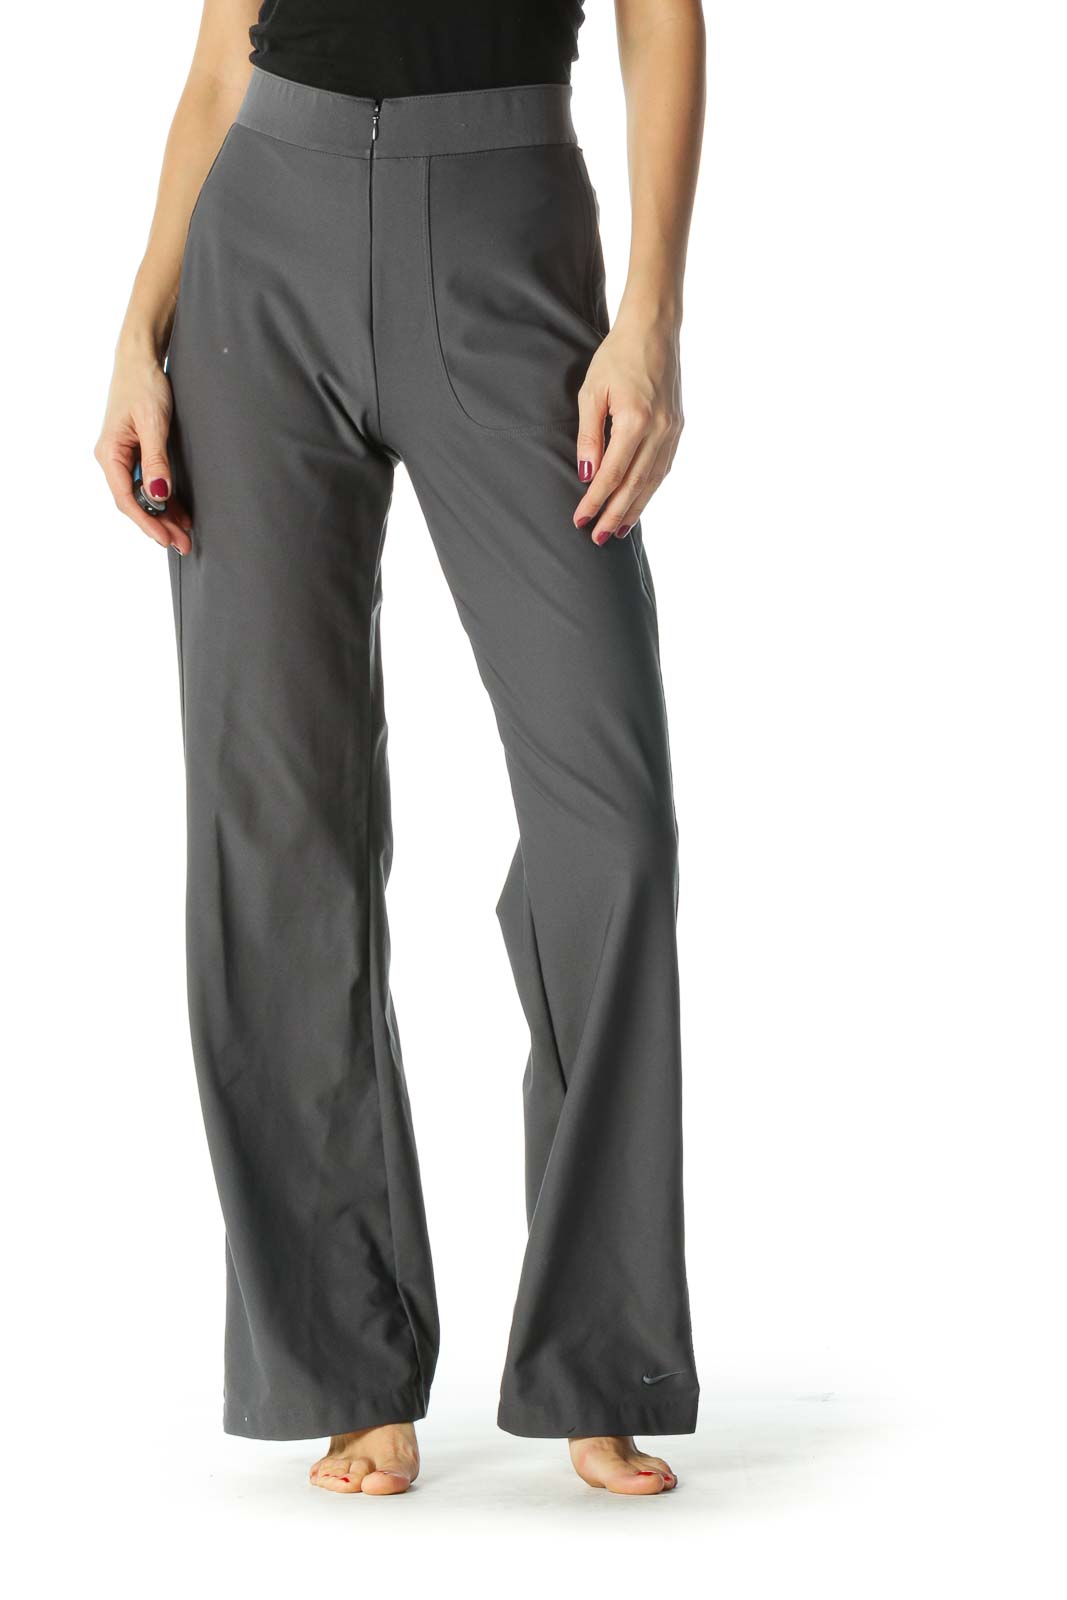 Gray Sports Pants Front